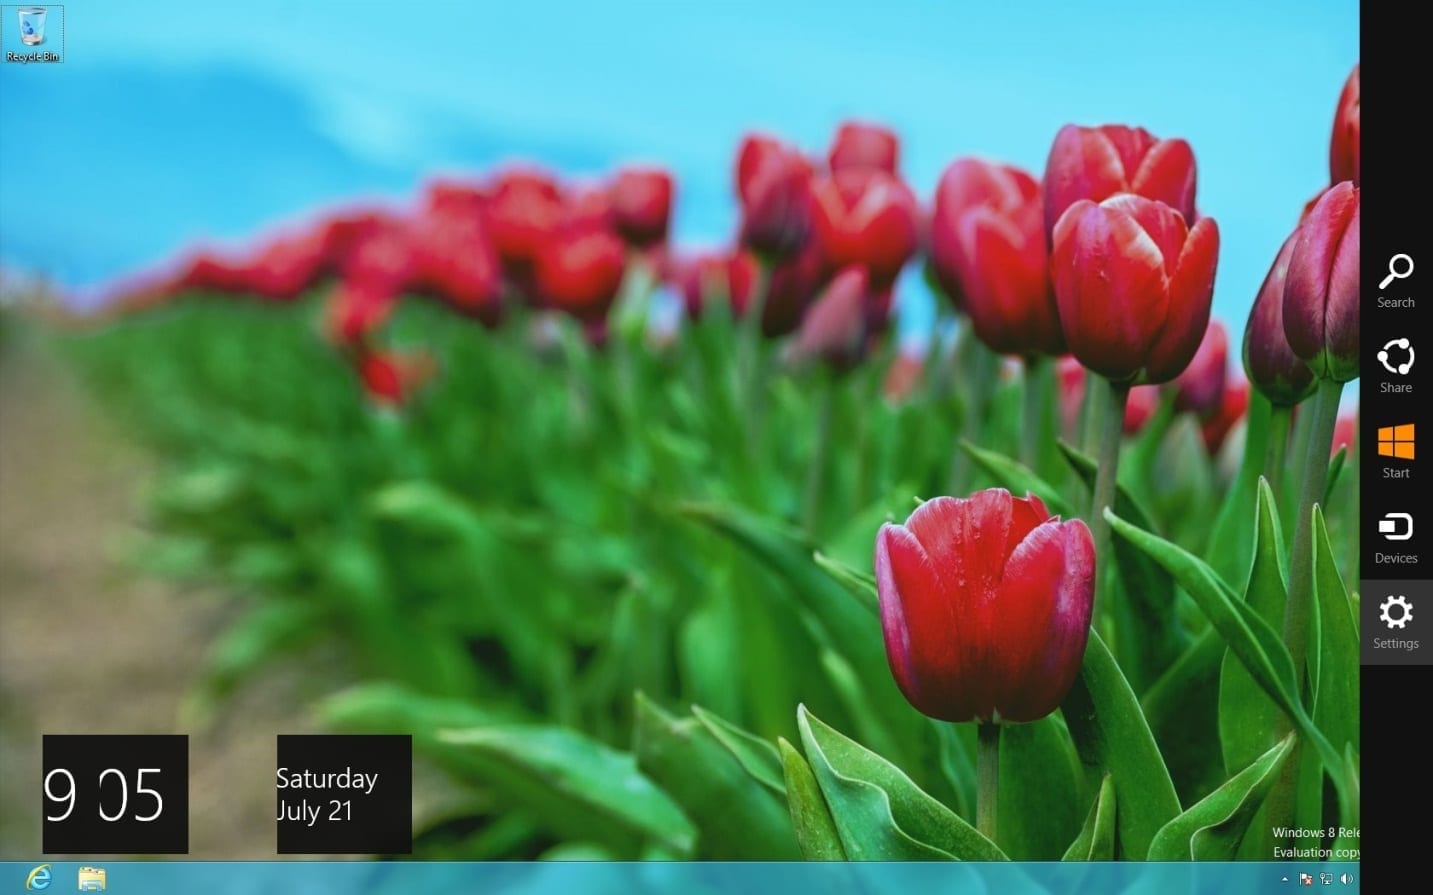 How to Shut Down Windows 8 With the Settings Charm